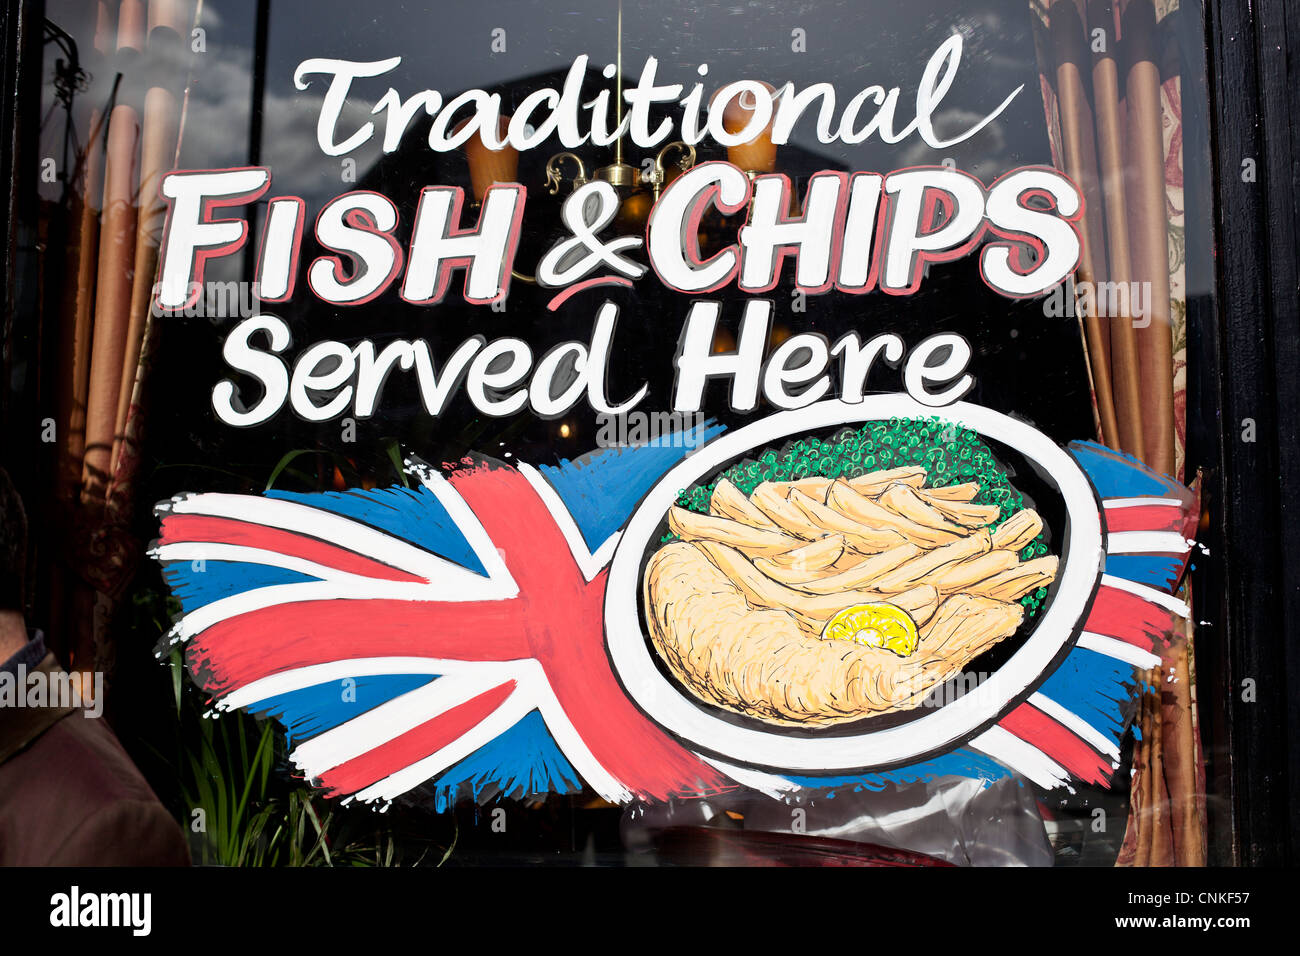 Fish and chips sign on a restaurant window, London, England, UK. Stock Photo